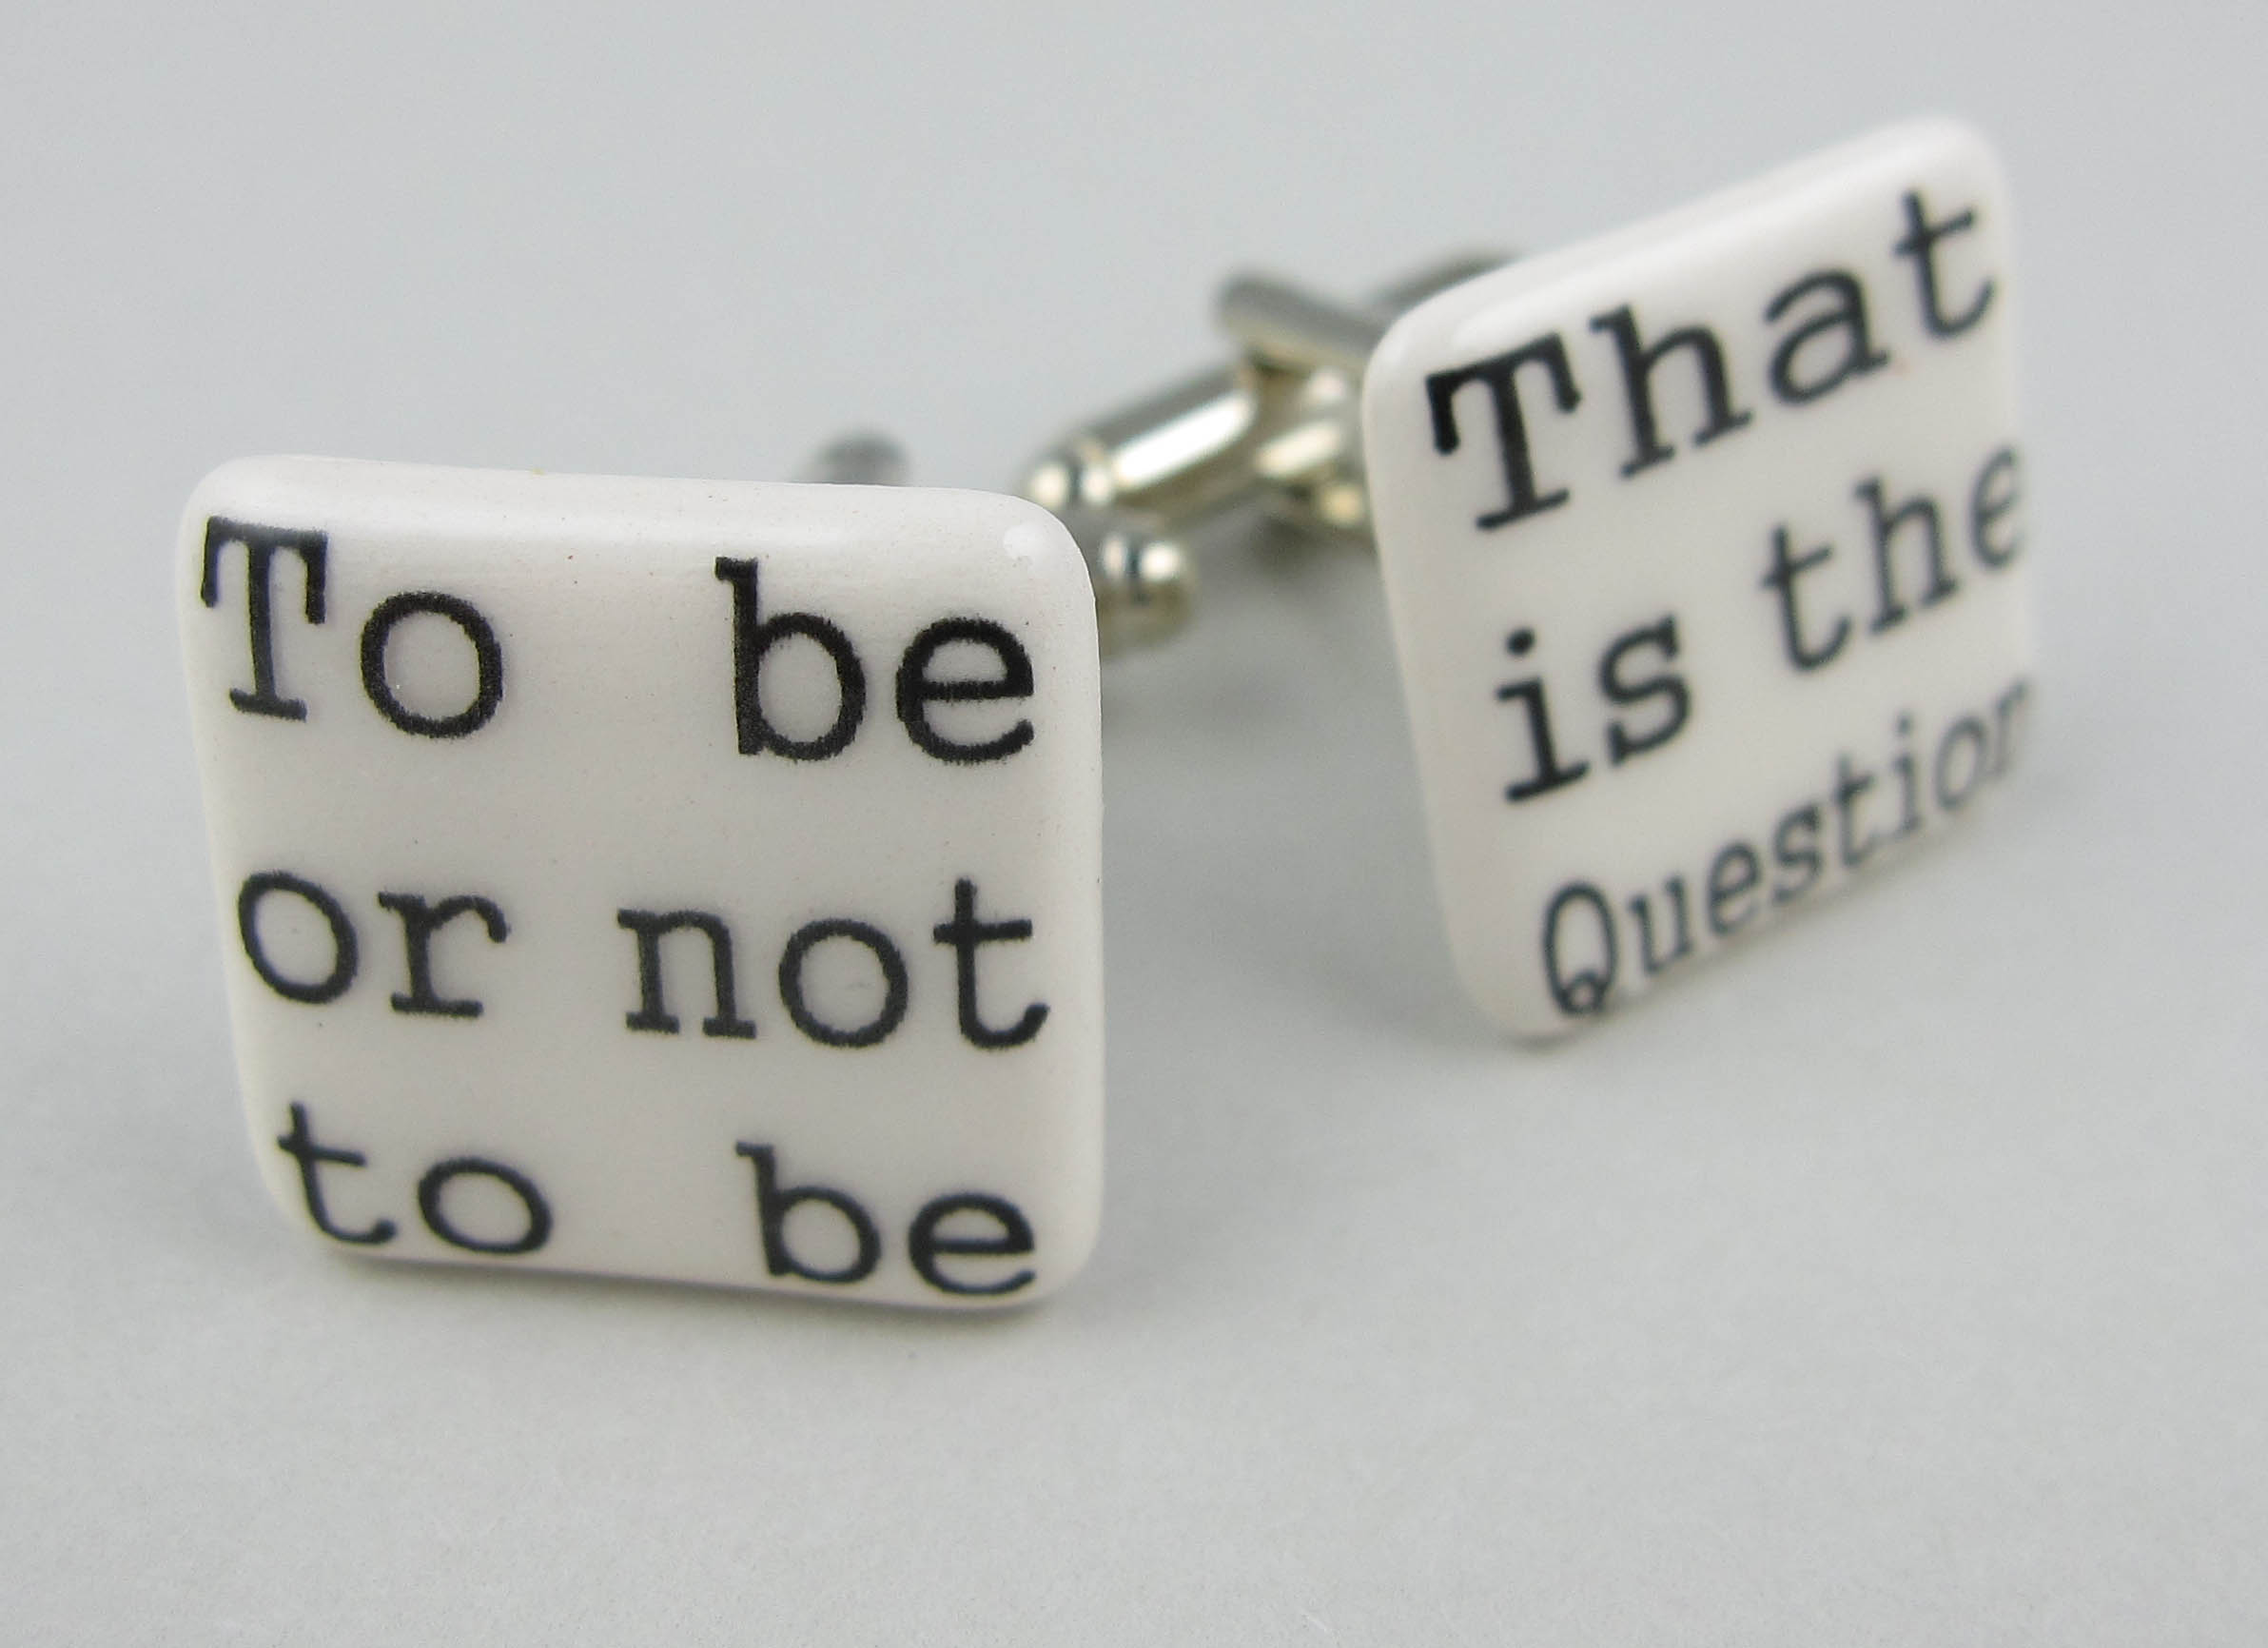 Globe Theatre To be or not to be cufflinks